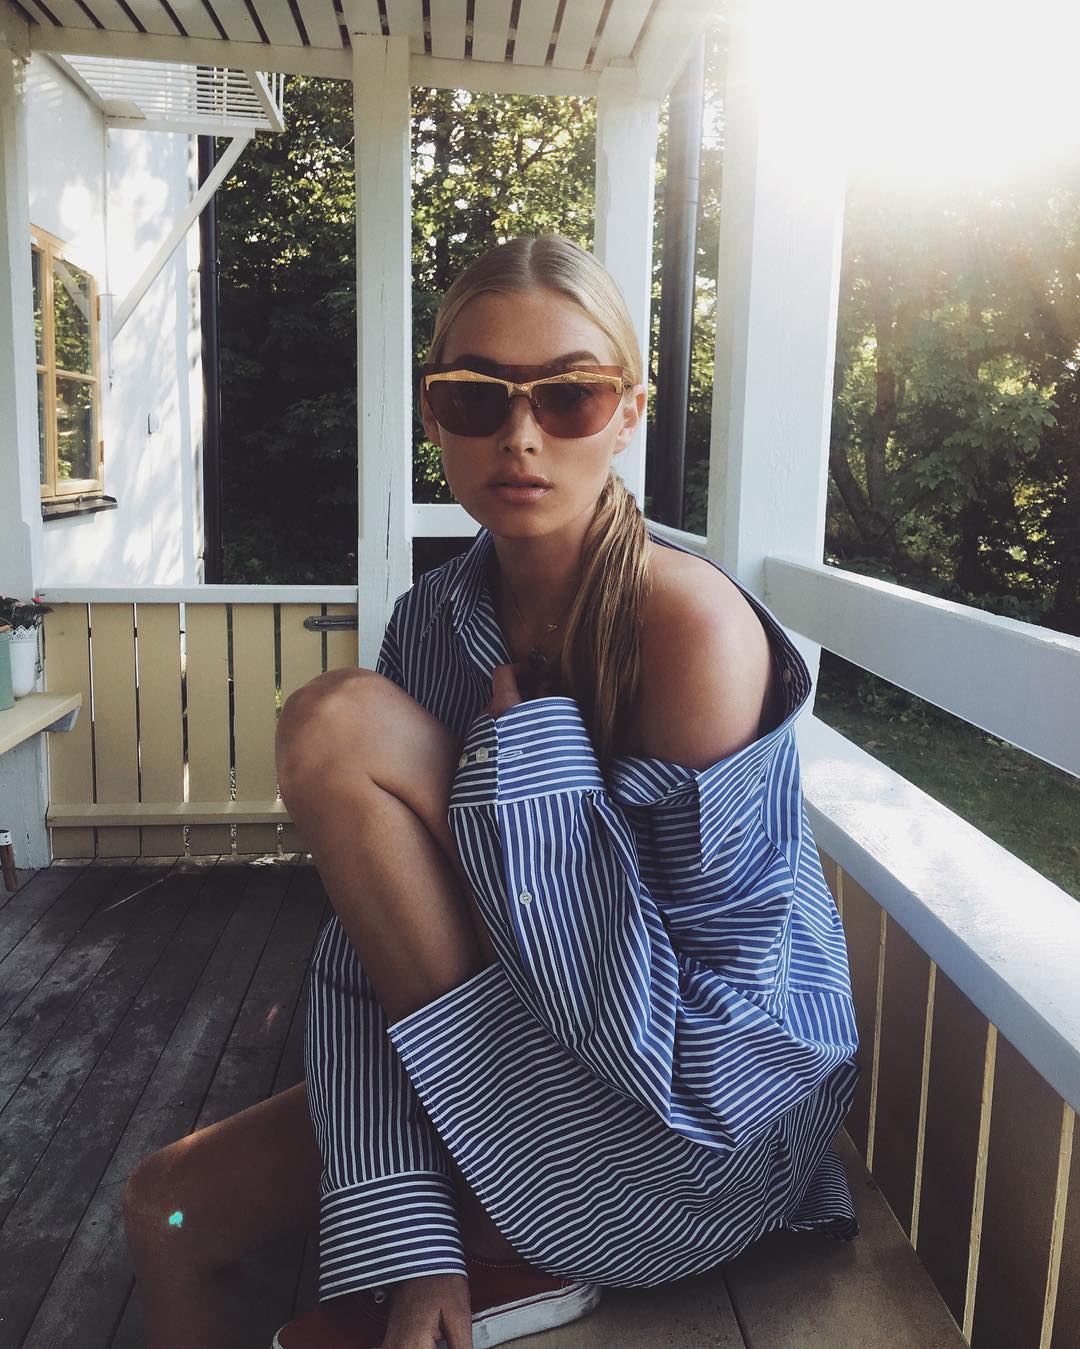 Elsa Hosk's Instagram Feed is Filled with Hot Shots!